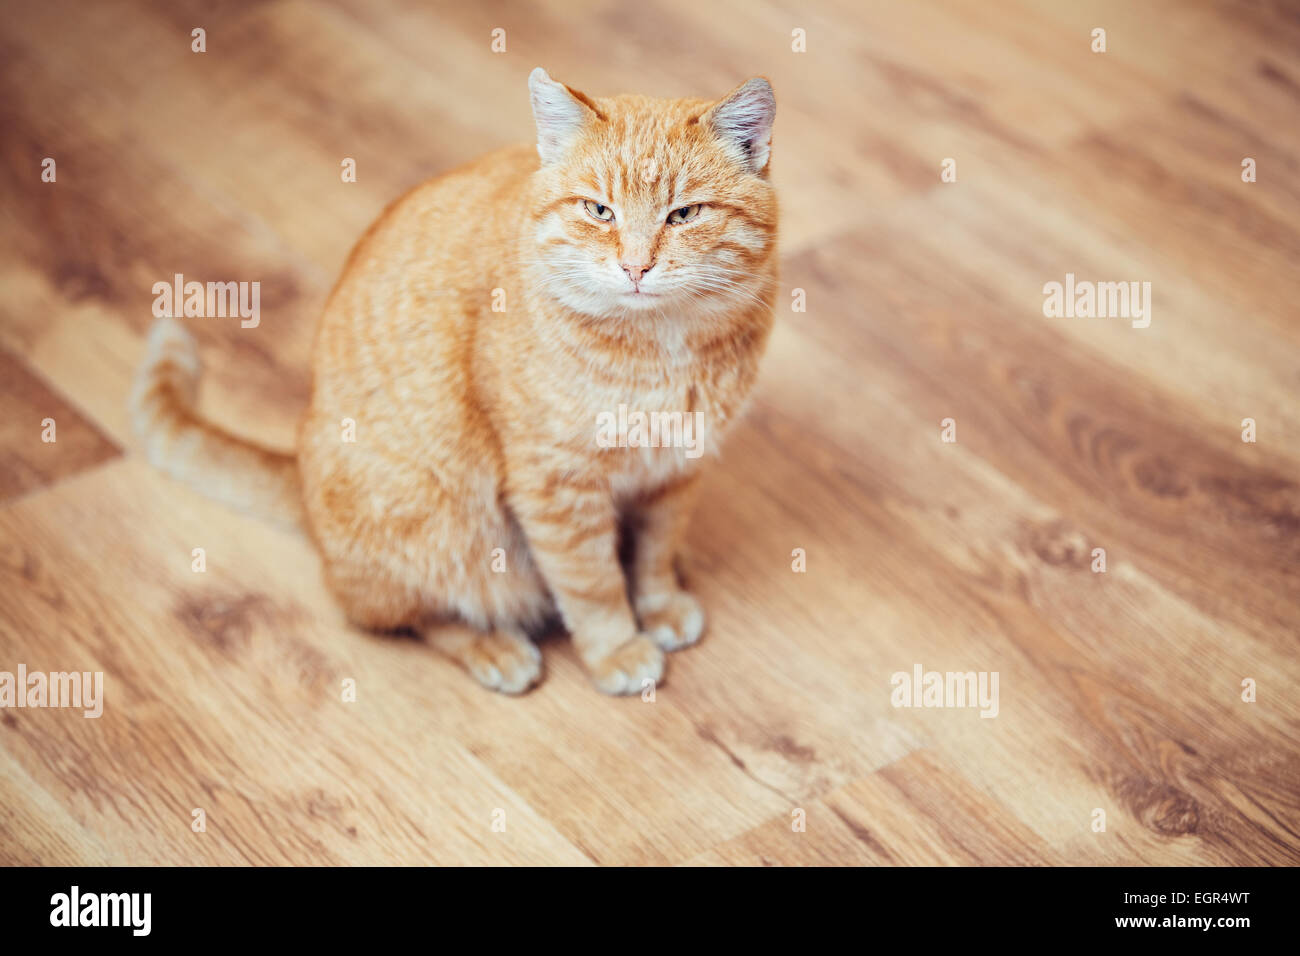 Peaceful Orange Red Tabby Cat Male Kitten Curled Up Sleeping In His Bed On Laminate Floor. Stock Photo